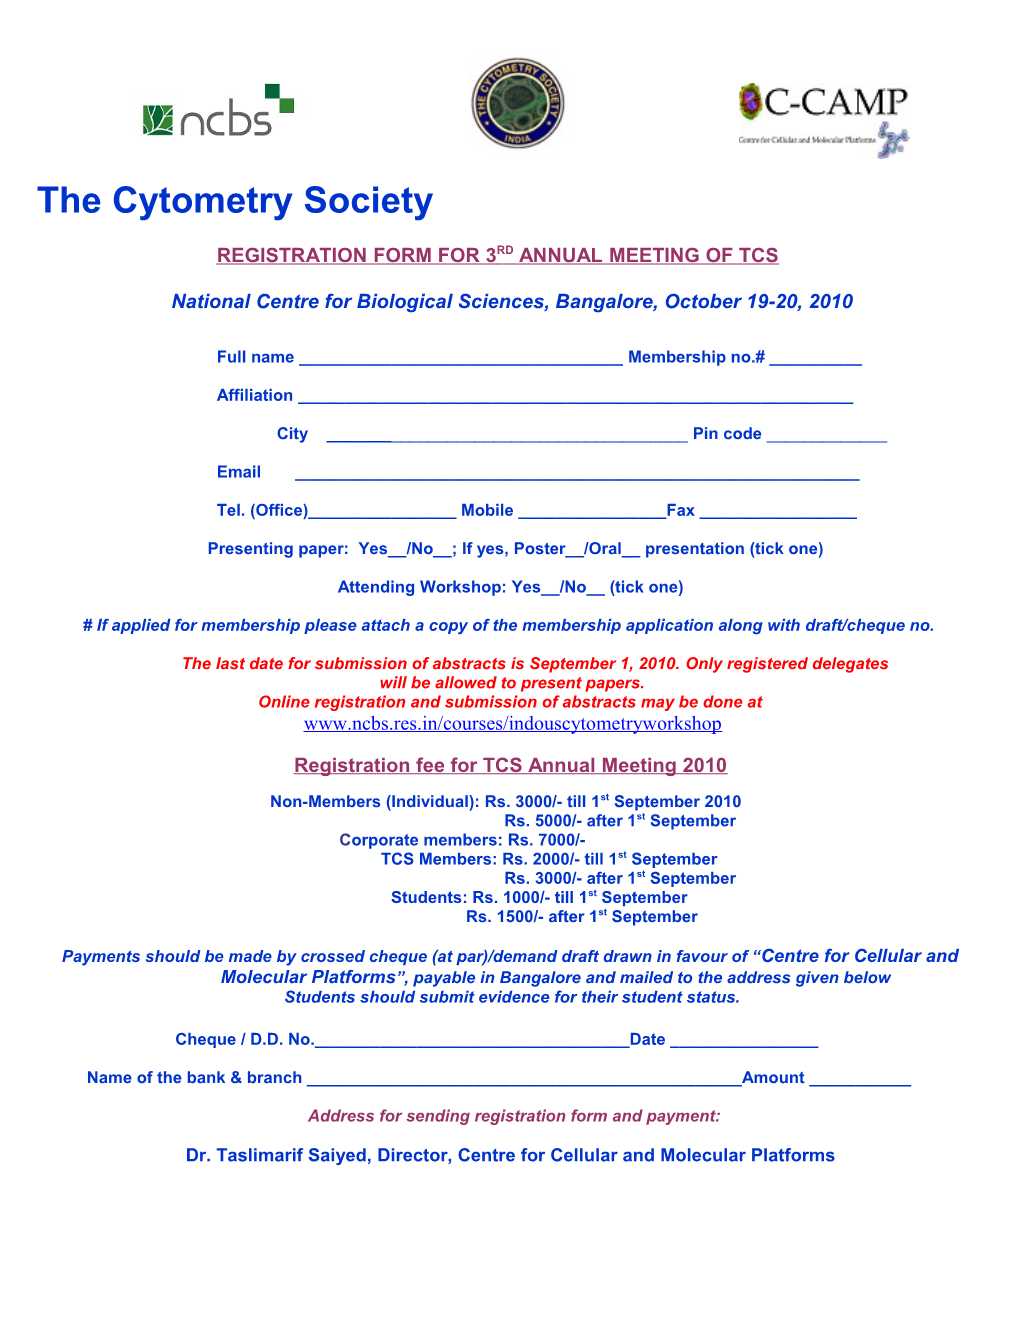 The Cytometry Society